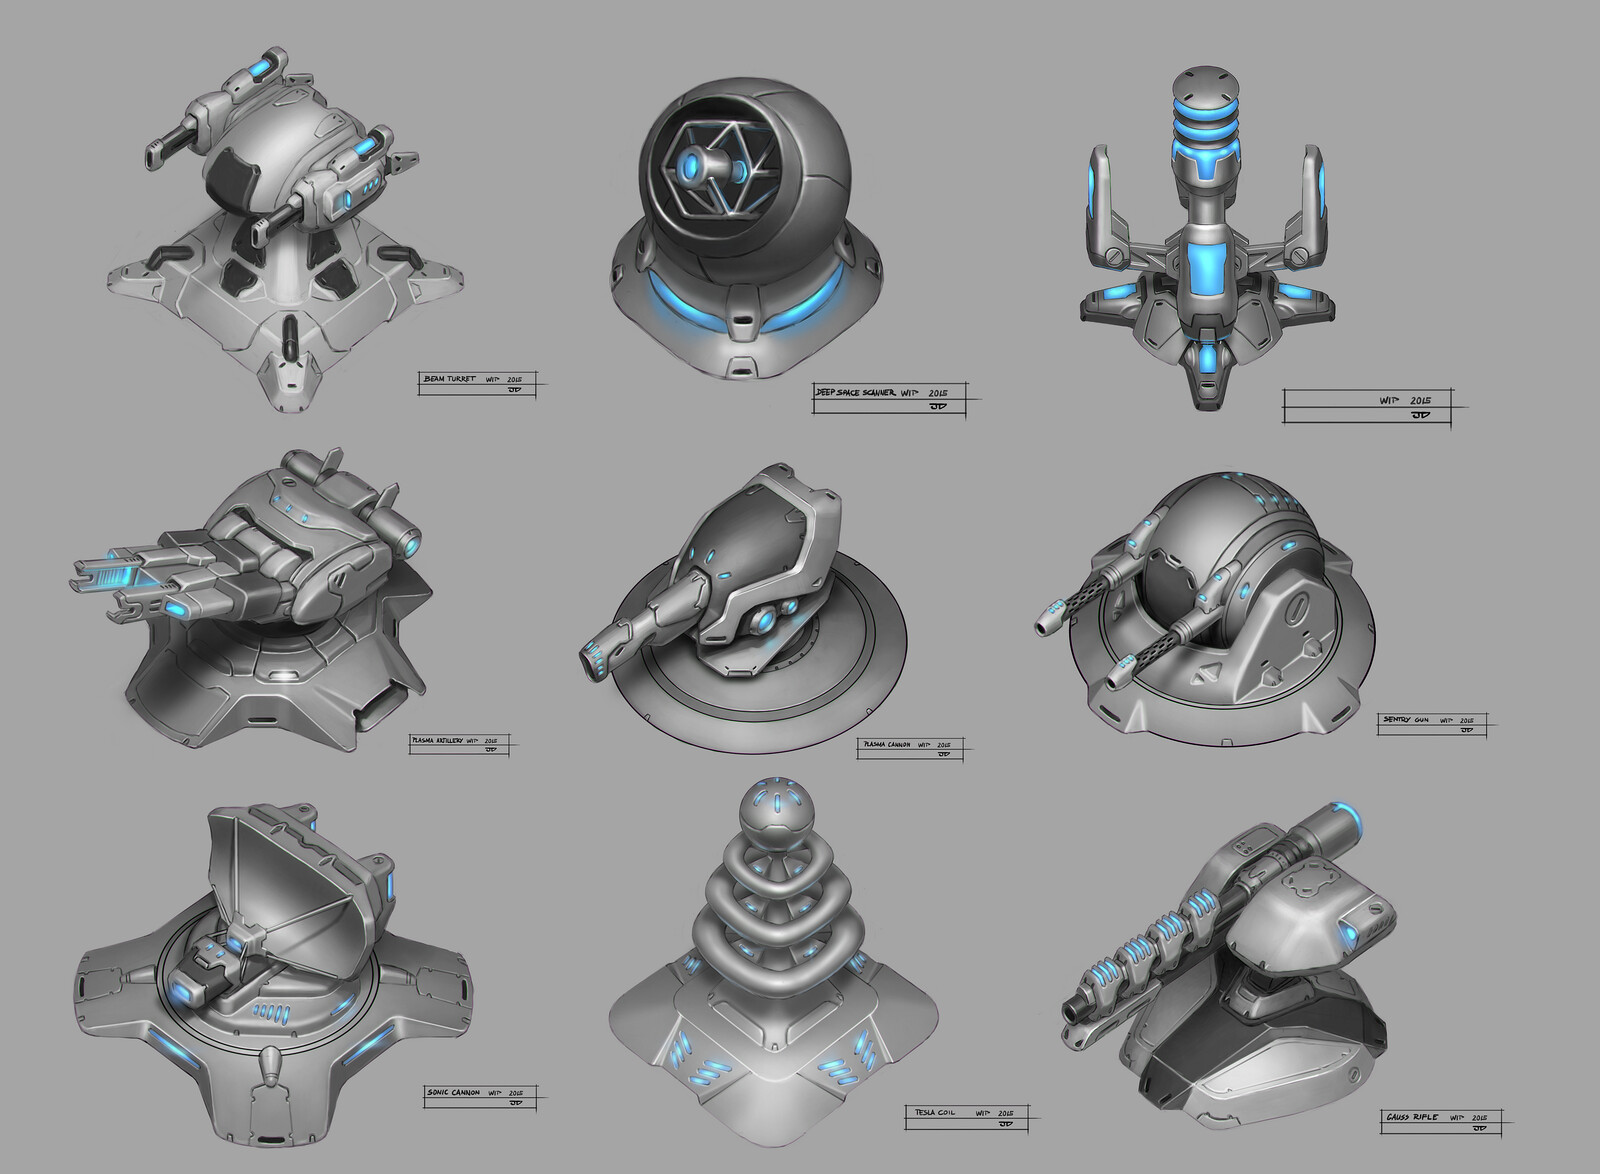 PlanetStorm - Alterian Assets and Units